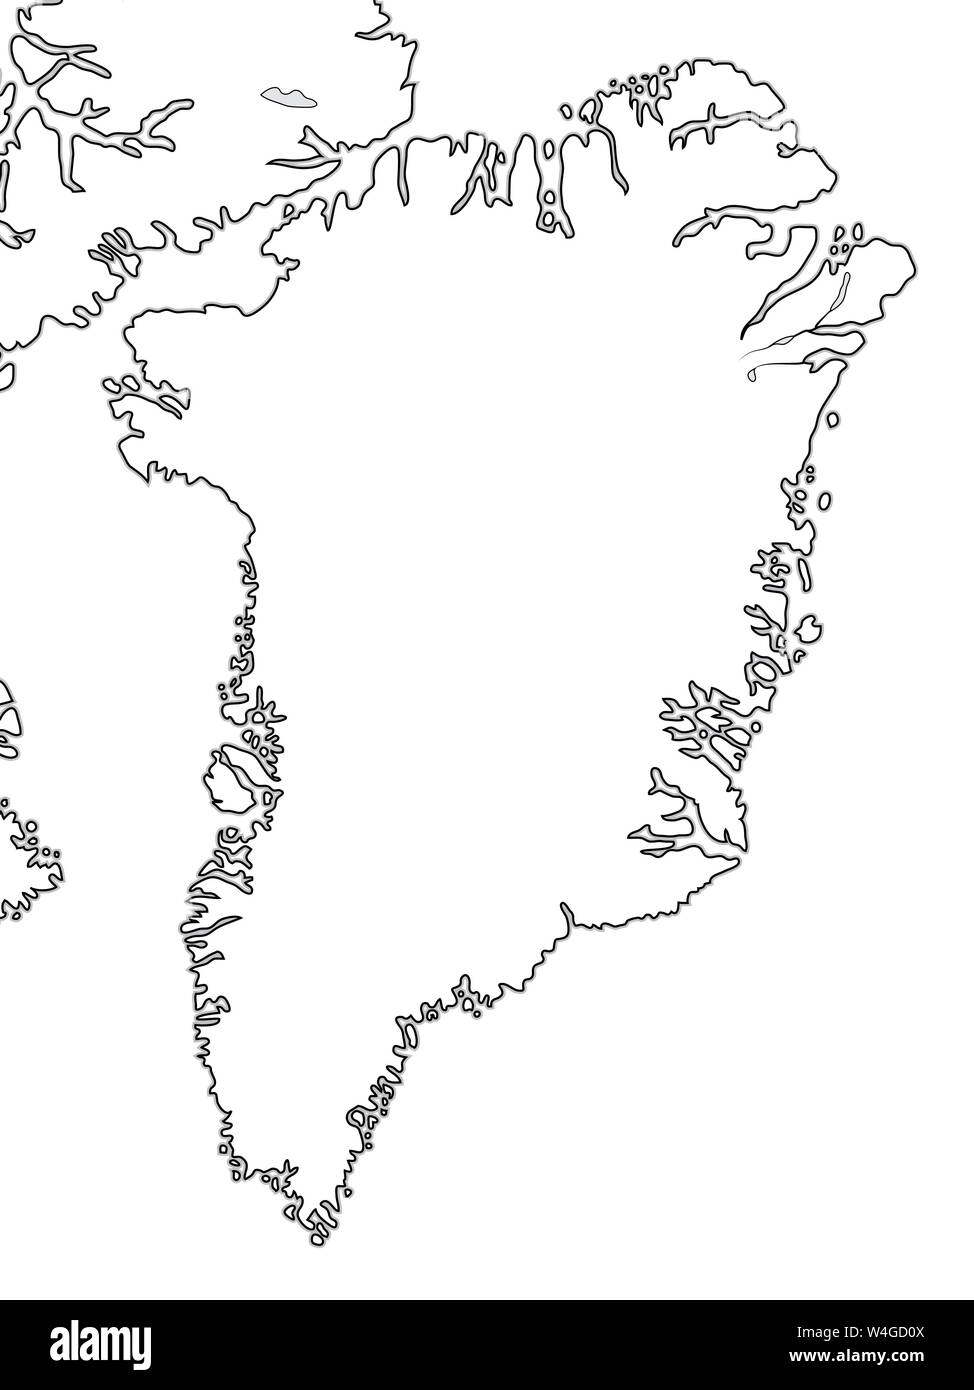 World Map of GREENLAND: Greenland, Arctic Archipelago, Atlantic Ocean. Geographic chart with oceanic coastline and islands. Stock Photo